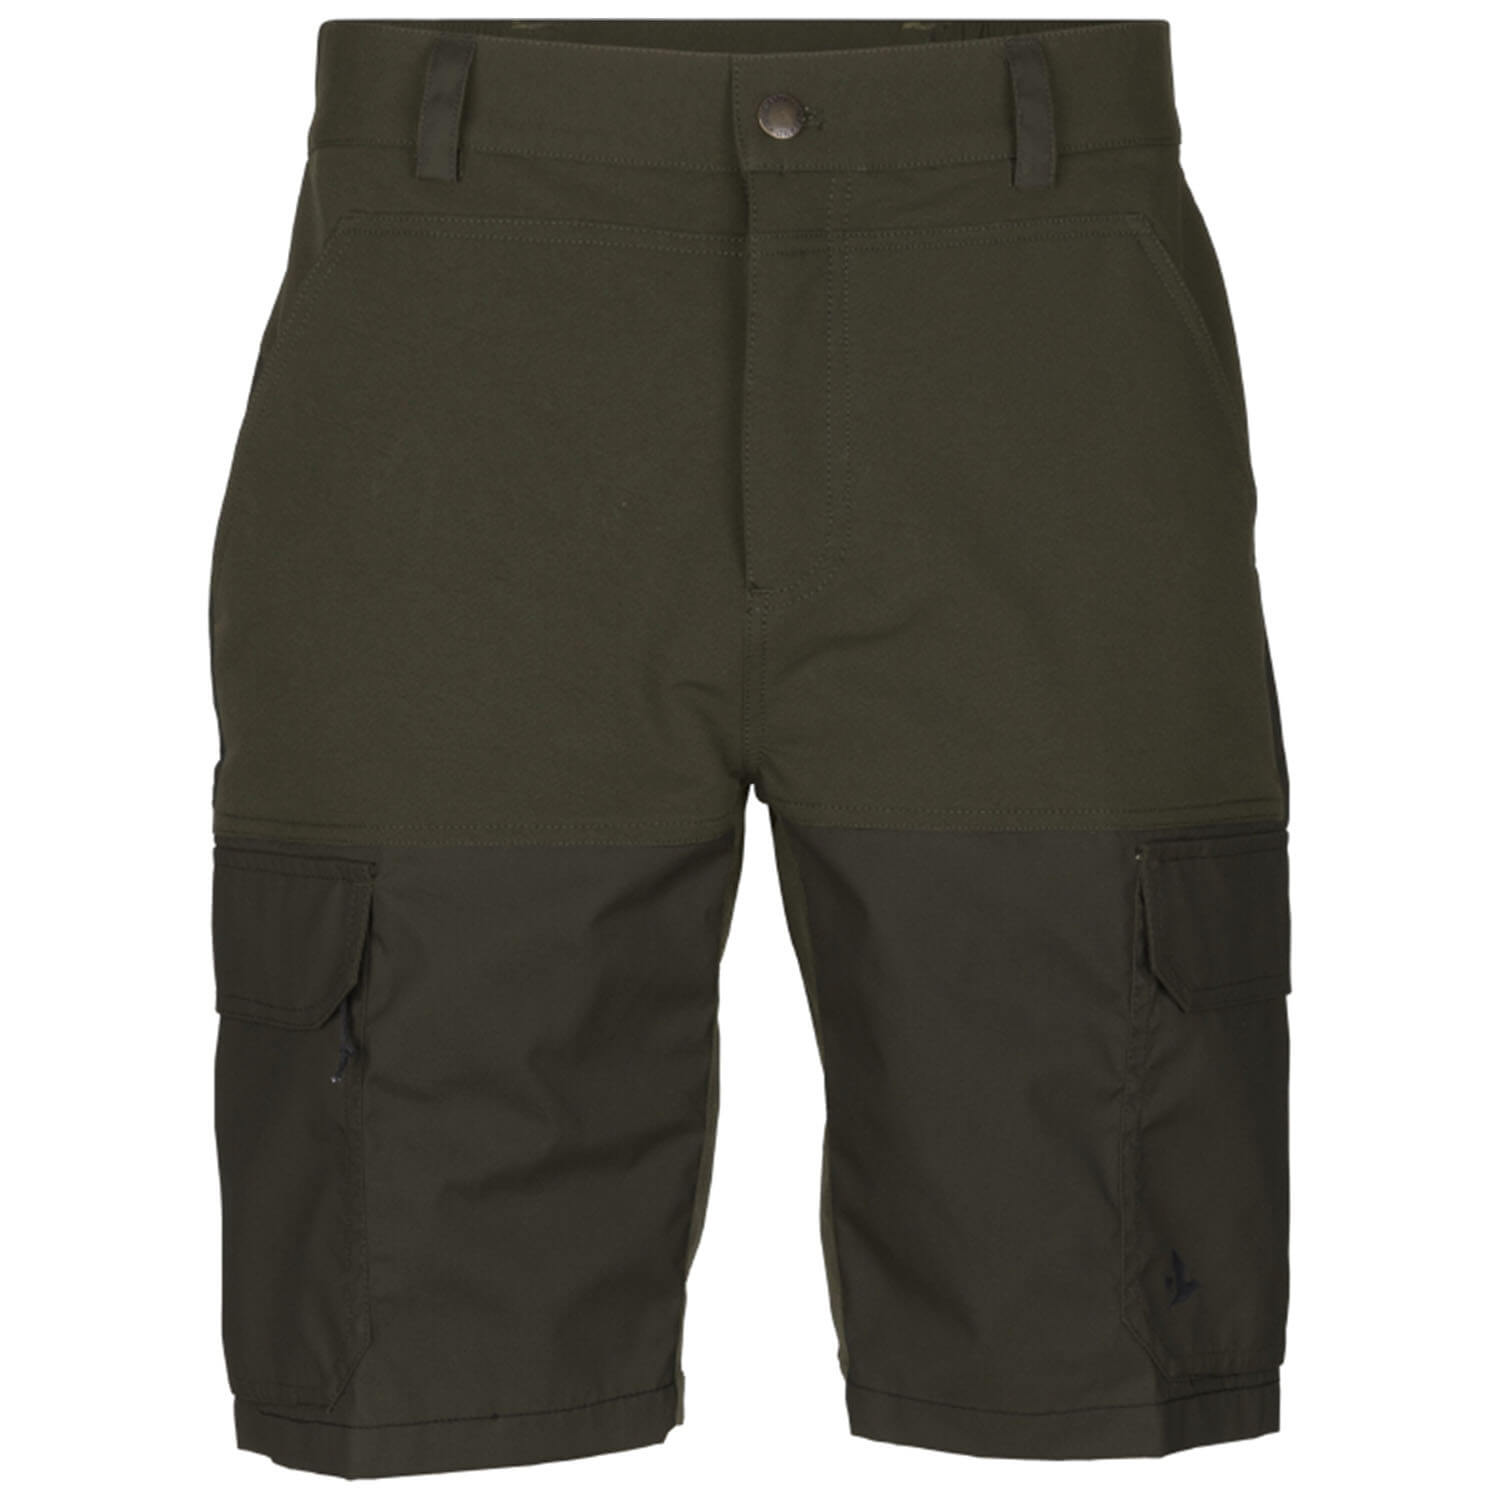 Seeland huntingshorts Elm (light pine/grizzly brown) -  Roe Buck Hunting